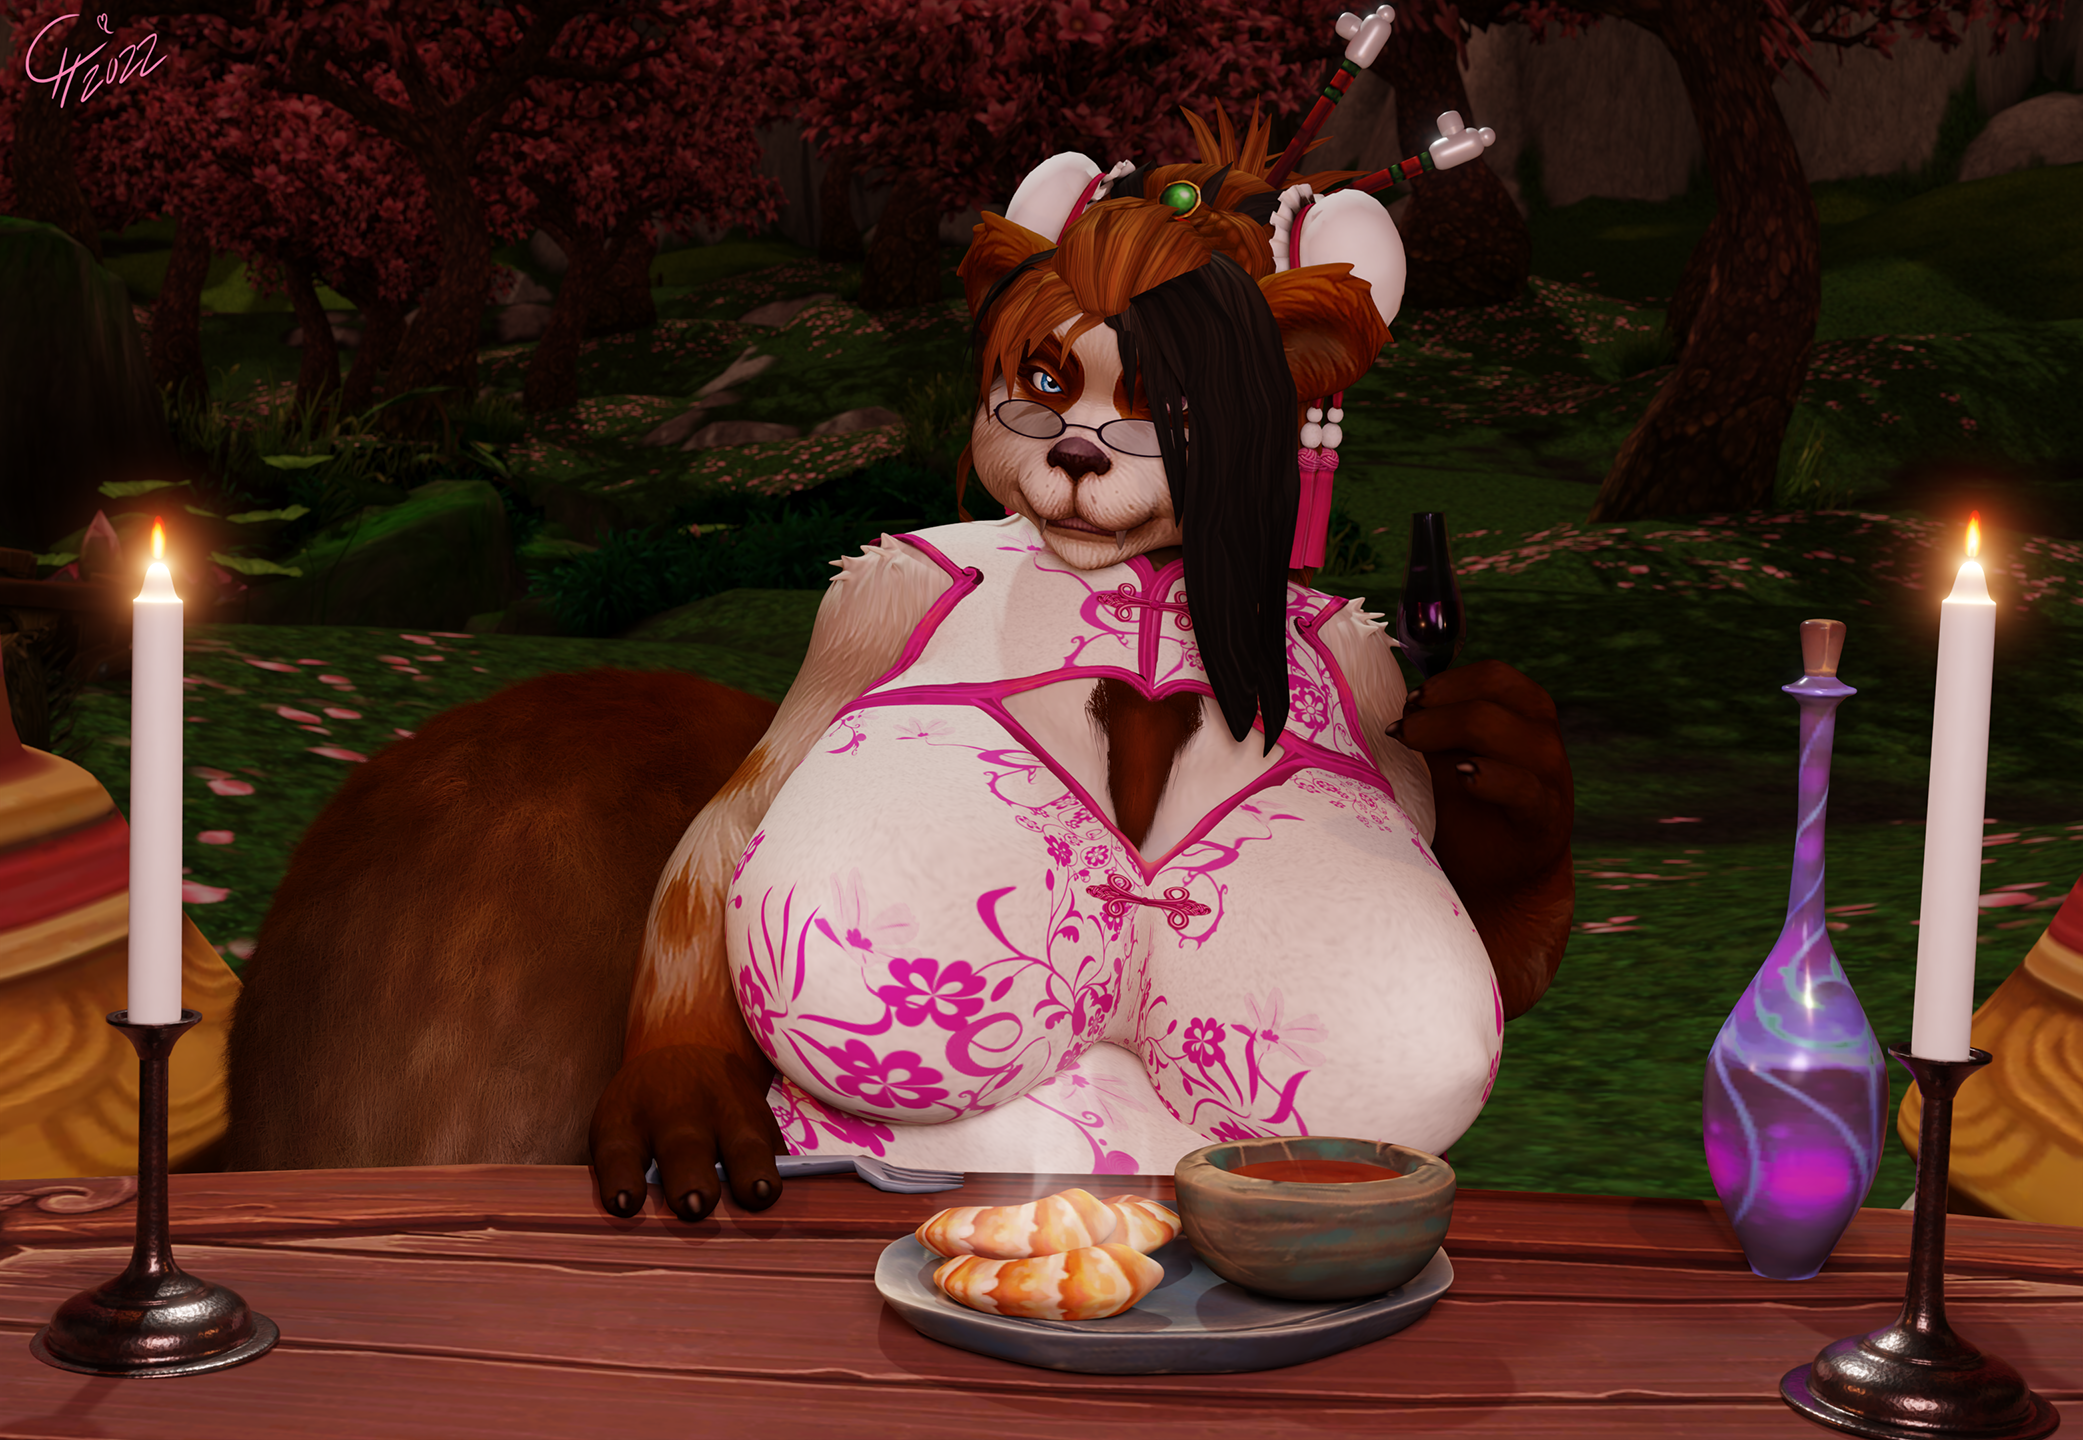 Pararel Dimensional Dating [Pandaren/SFW]
While you're out on a Valentine's Day date
with an beautiful woman with glasses, in a
pararel dimension, you are out on a date
with an beautiful woman with glasses.
[b][url=http://bakaras.com/murlocish/albums/userpics/10001/30/2022Datenight02XL.png]==XL-Size Edit==[/url][/b]
Keywords: OC;Pandaren;SFW;BBW;Tease;Pinup